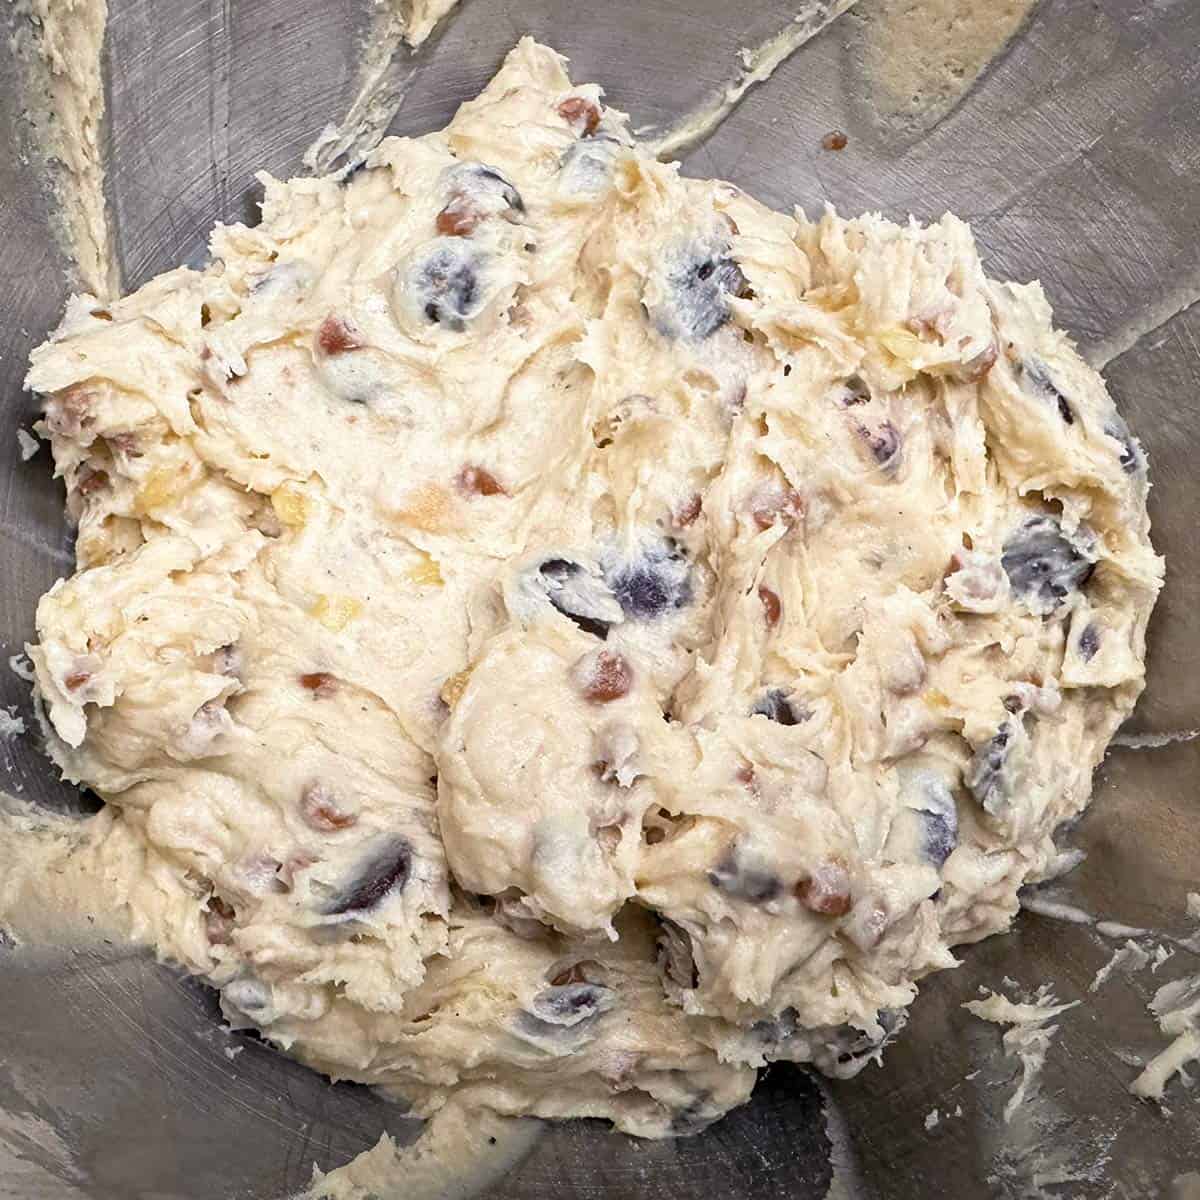 All ingredients for the banana with chocolate and caramel chip cookies is mixed and sitting in the bowl.